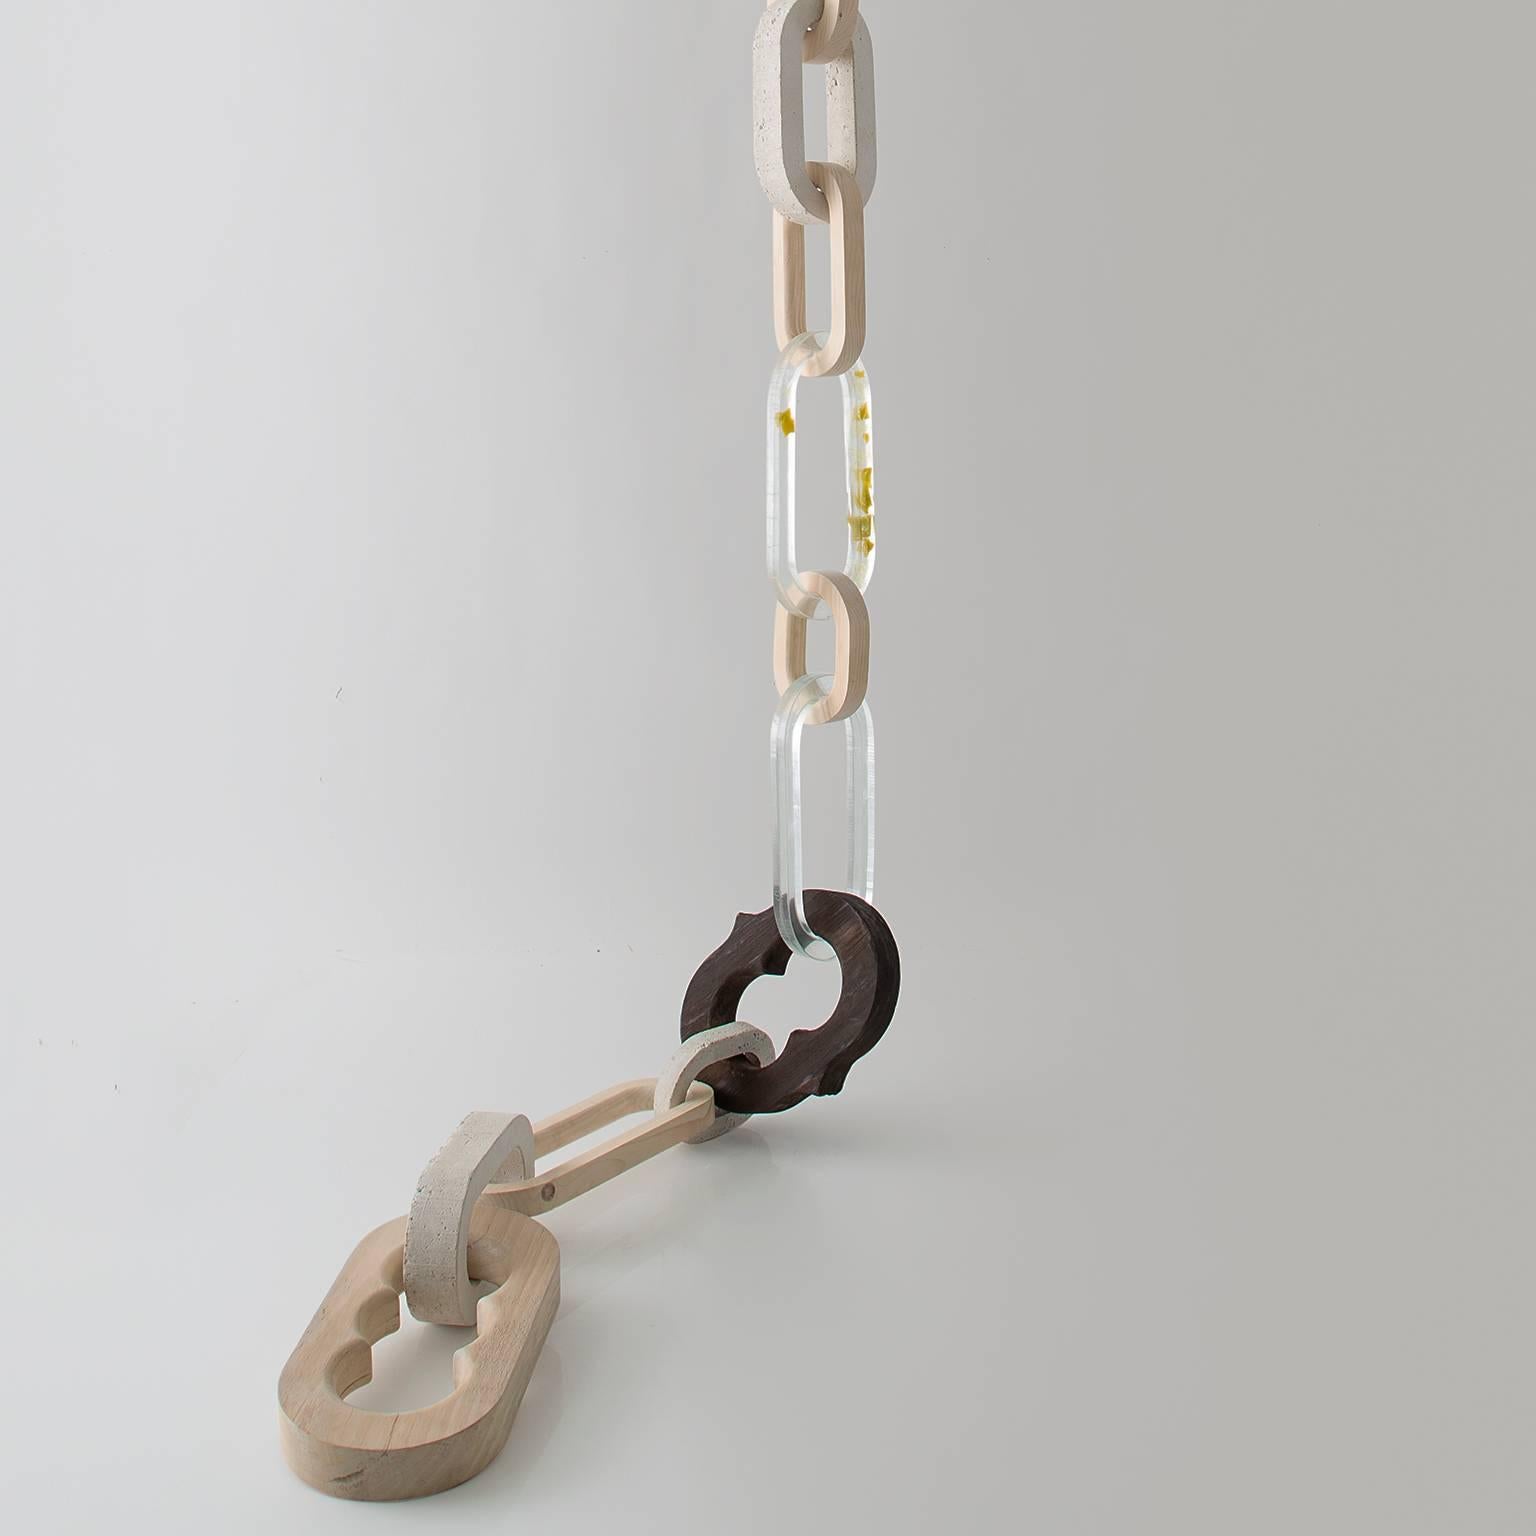 Twelve Foot Long Hanging Chain Sculpture in Concrete, Resin and Wood - IN STOCK In Excellent Condition For Sale In Brooklyn, NY